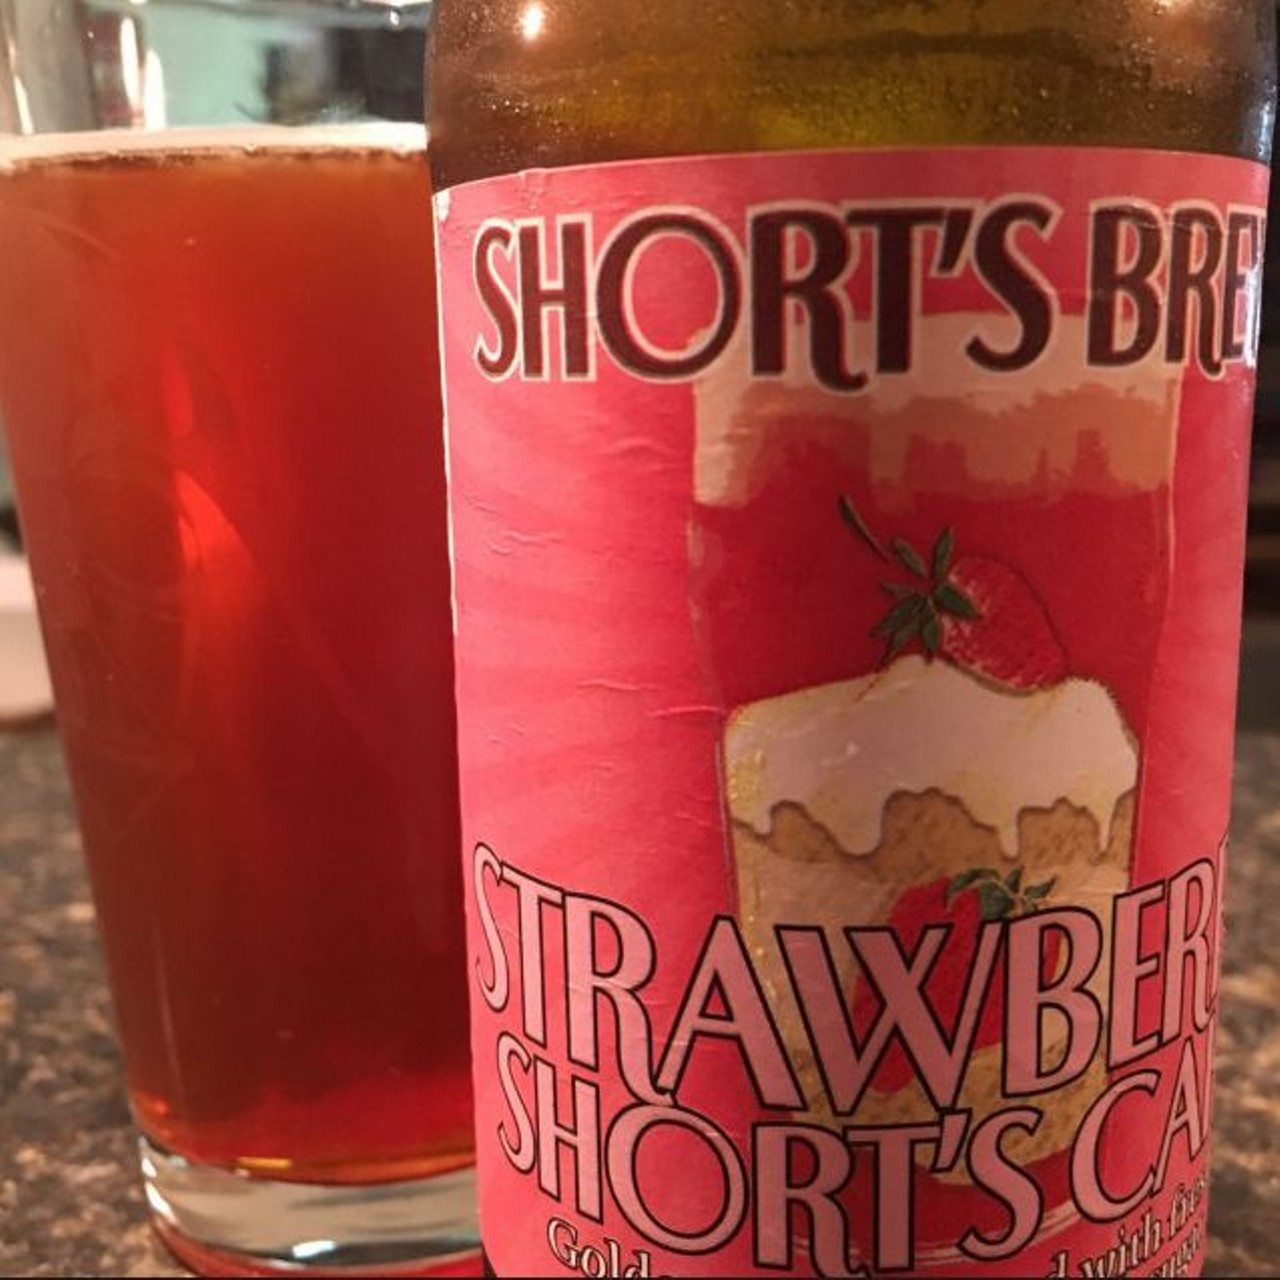 Strawberry Short cake
ABV: 5.0% 
Strawberry Short's Cake is obviously a fruity beer that tastes just like a strawberry shortcake, and probably half the calories.